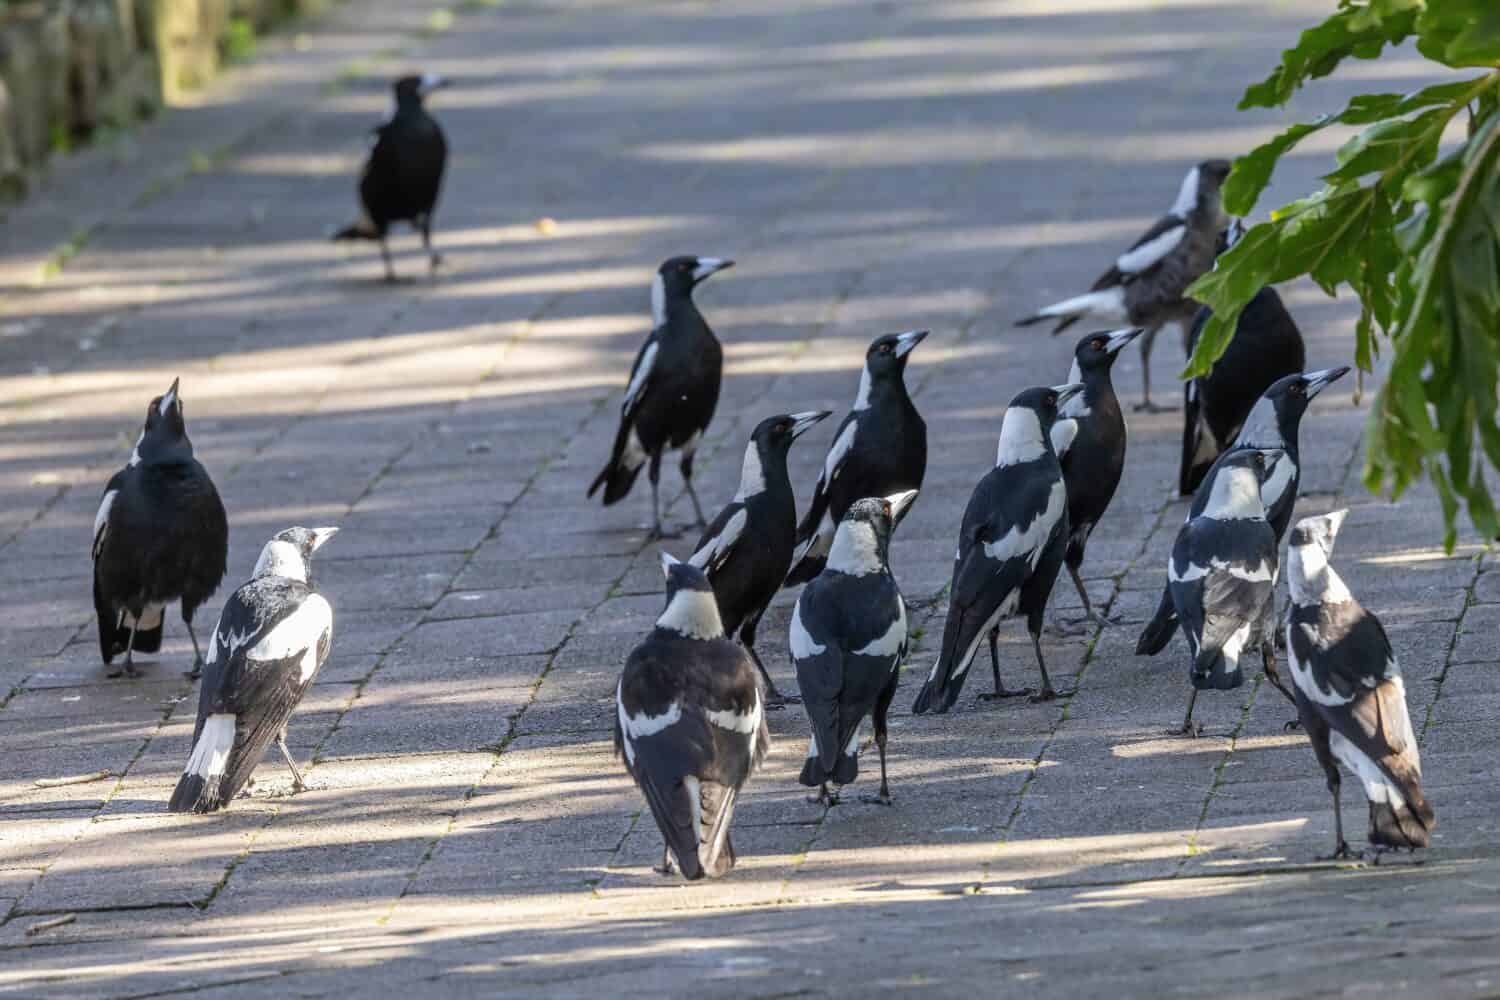 Australian Magpies gathered around people with food